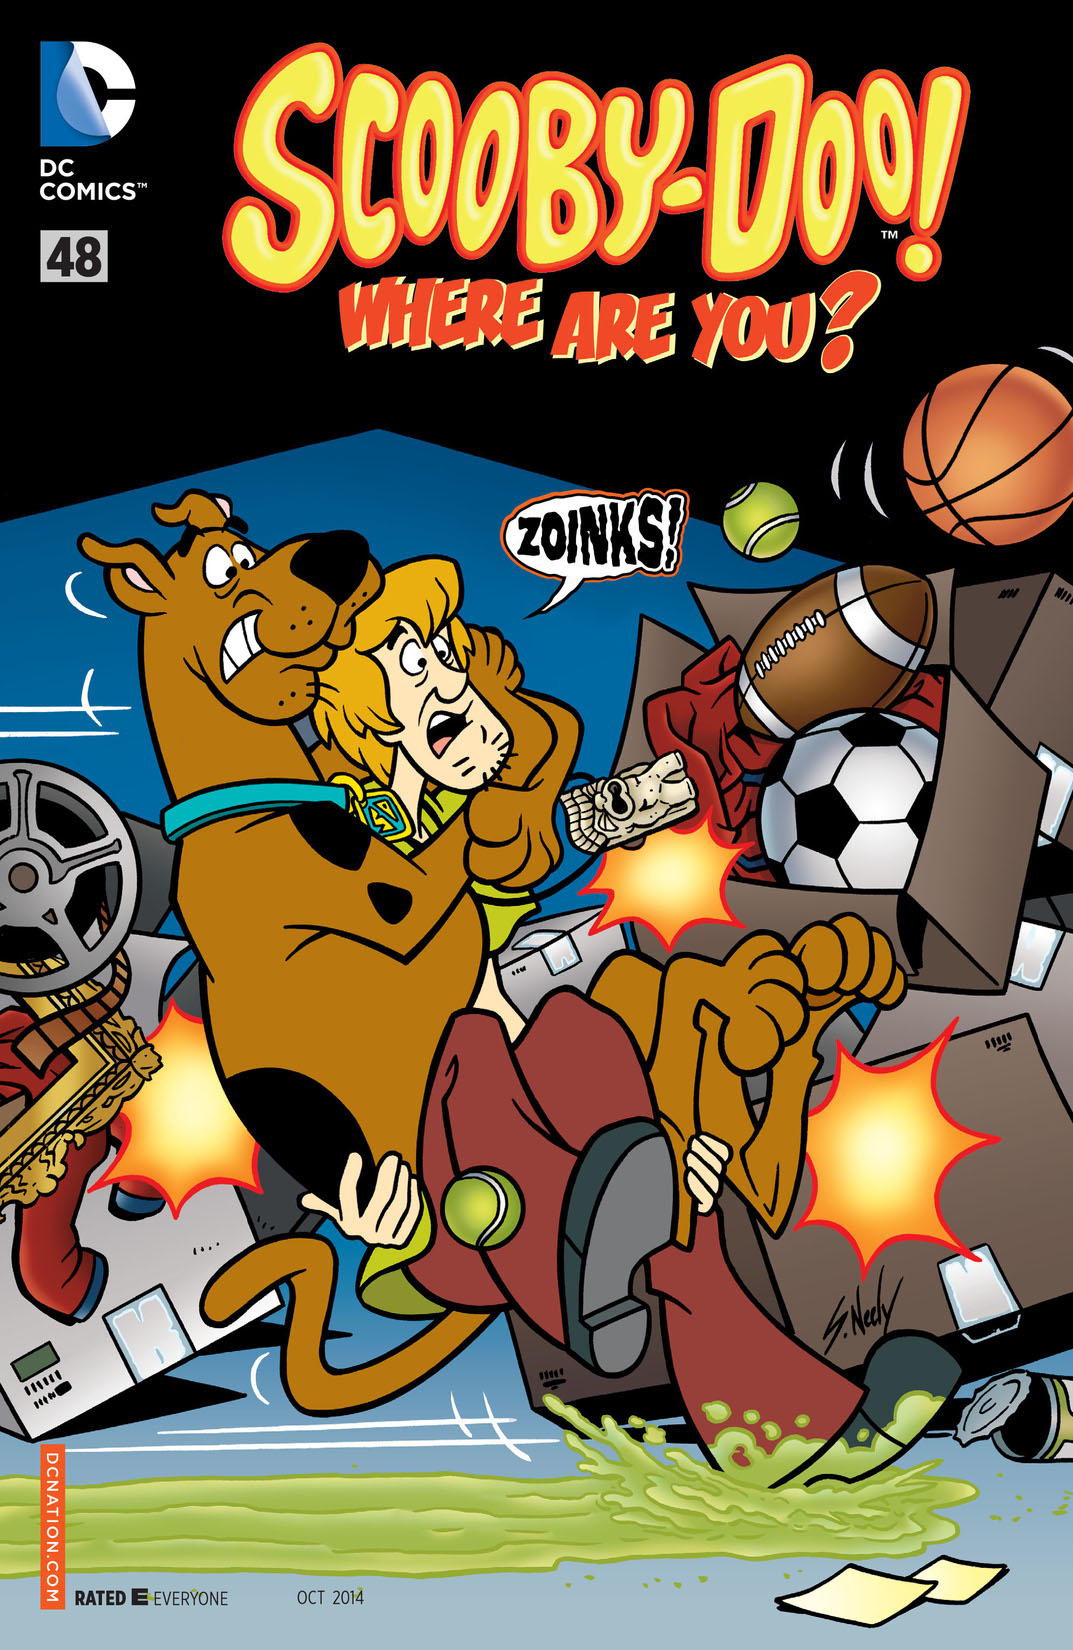 Scooby-Doo, Where Are You? #48 preview images